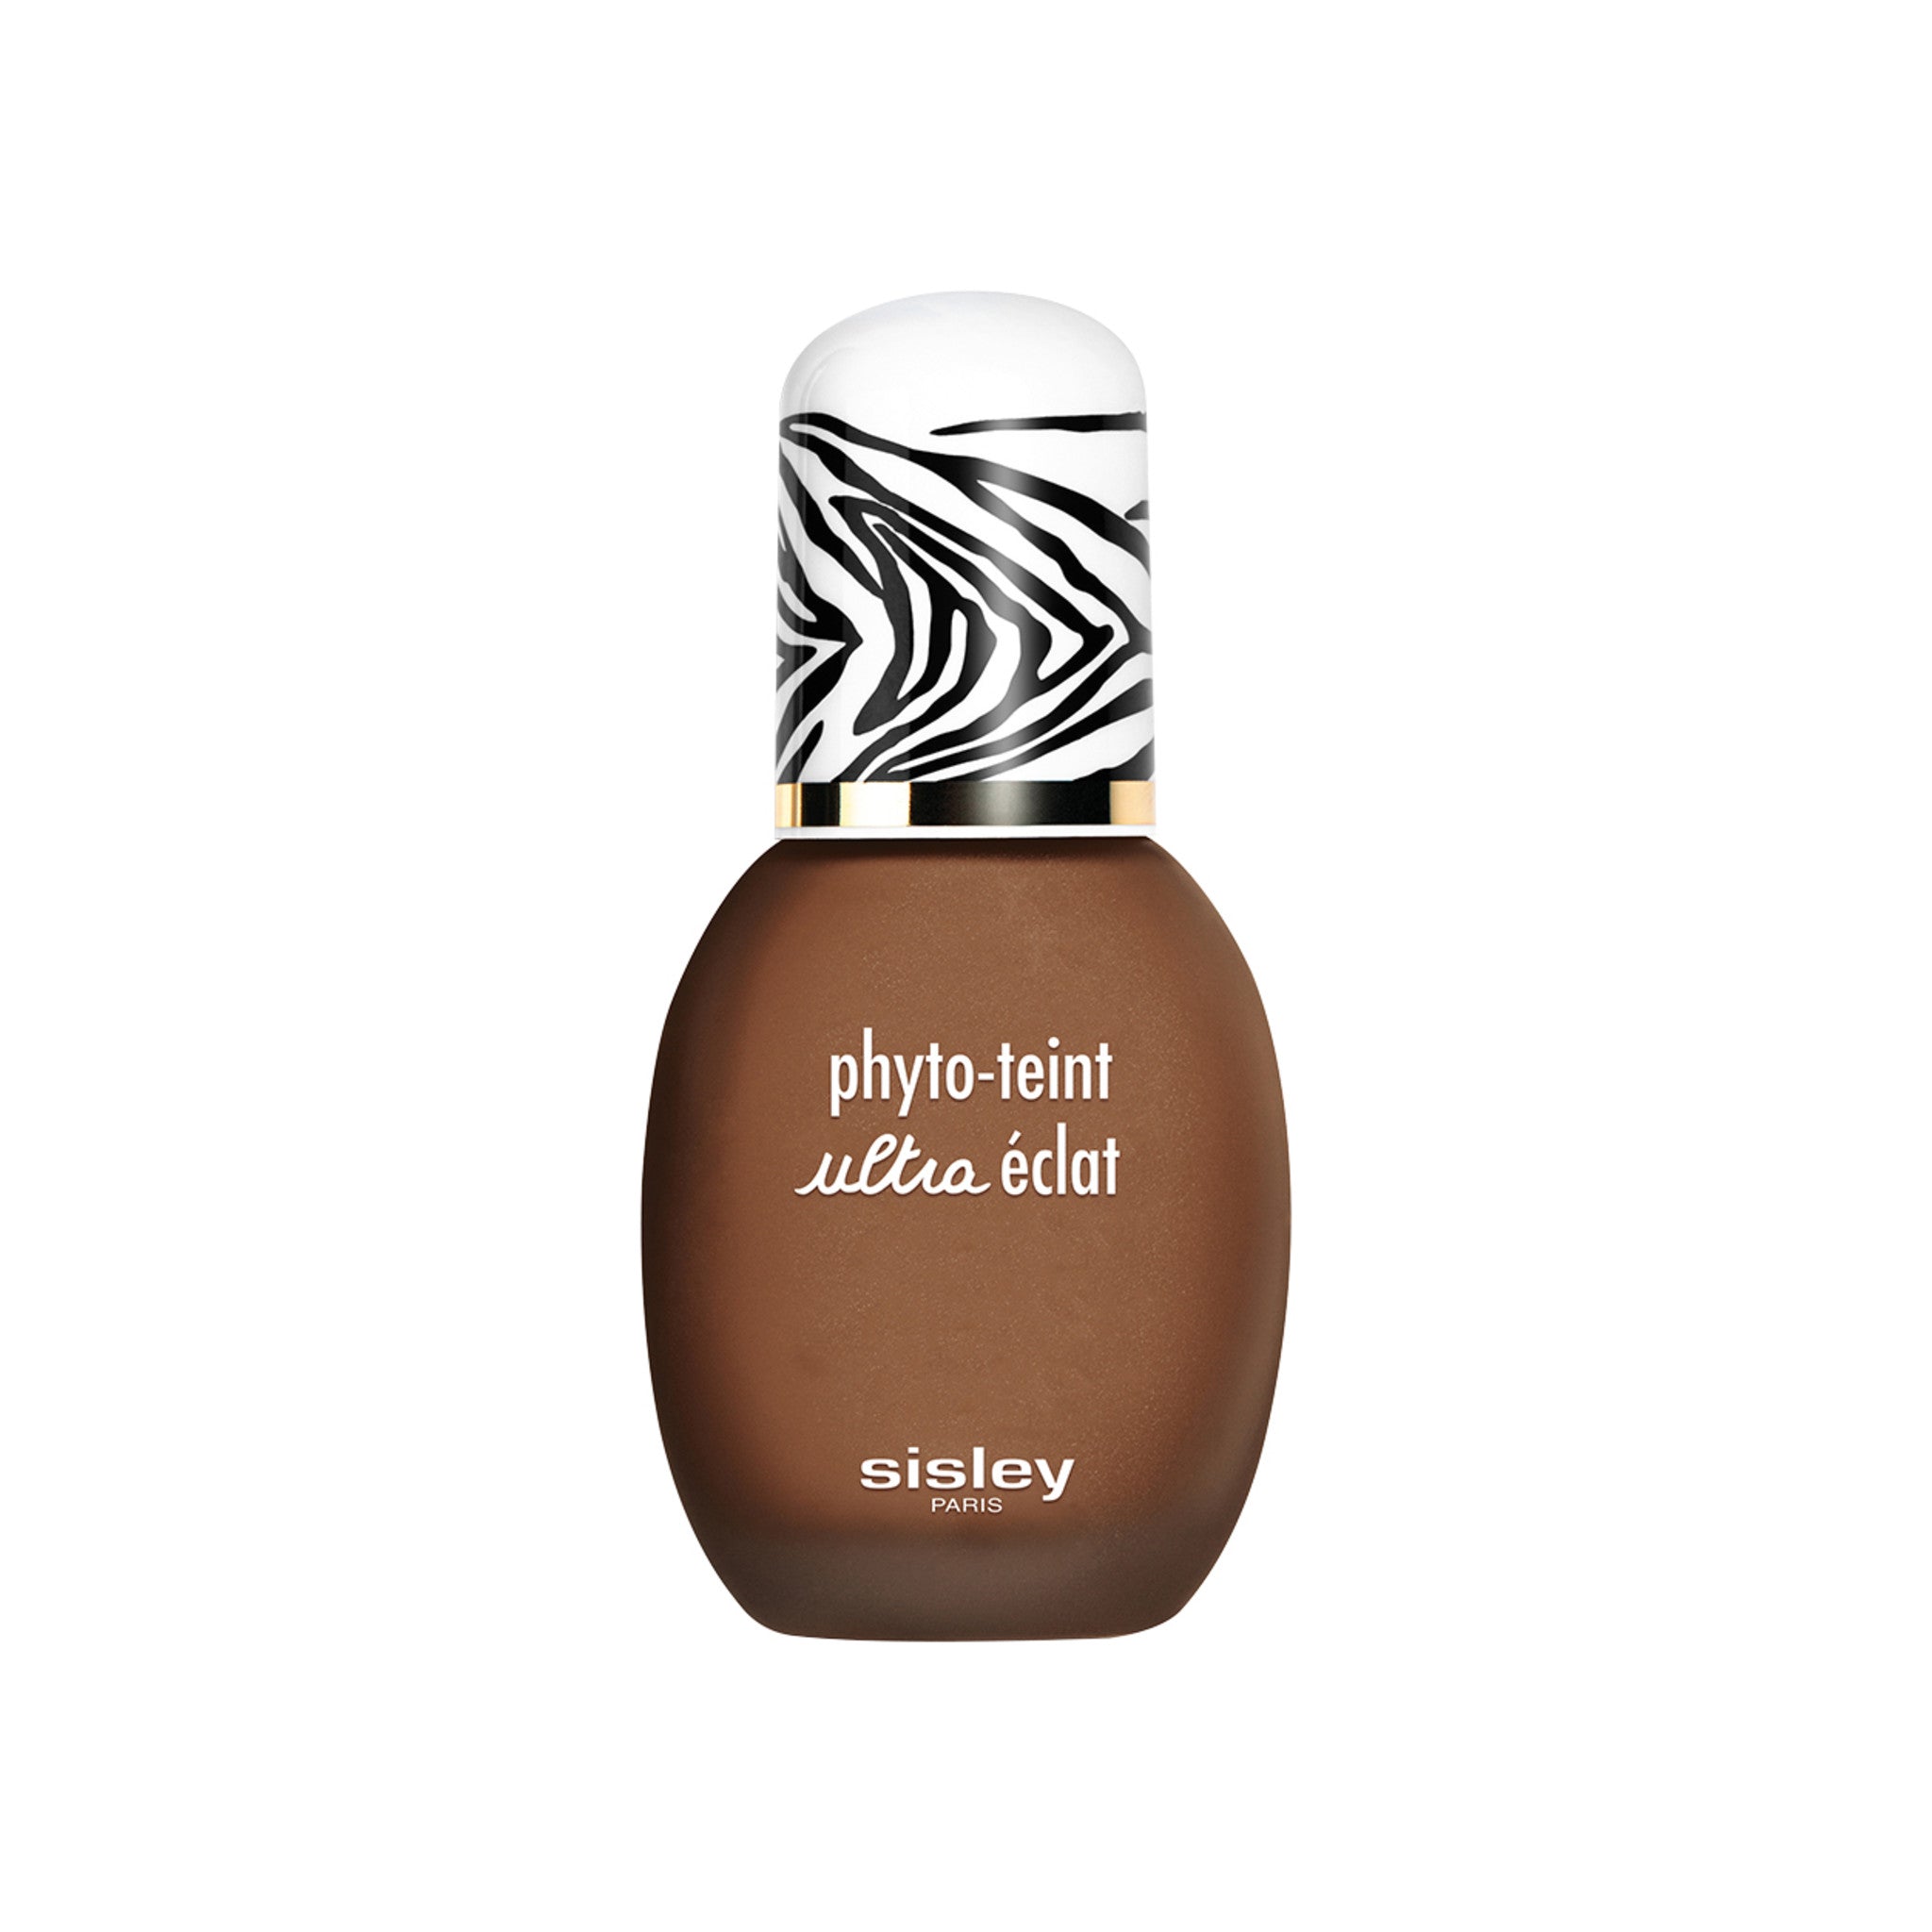 Sisley-Paris Phyto-Teint Ultra Eclat Foundation Color/Shade variant: 8C Cappuccino main image. This product is for deep complexions